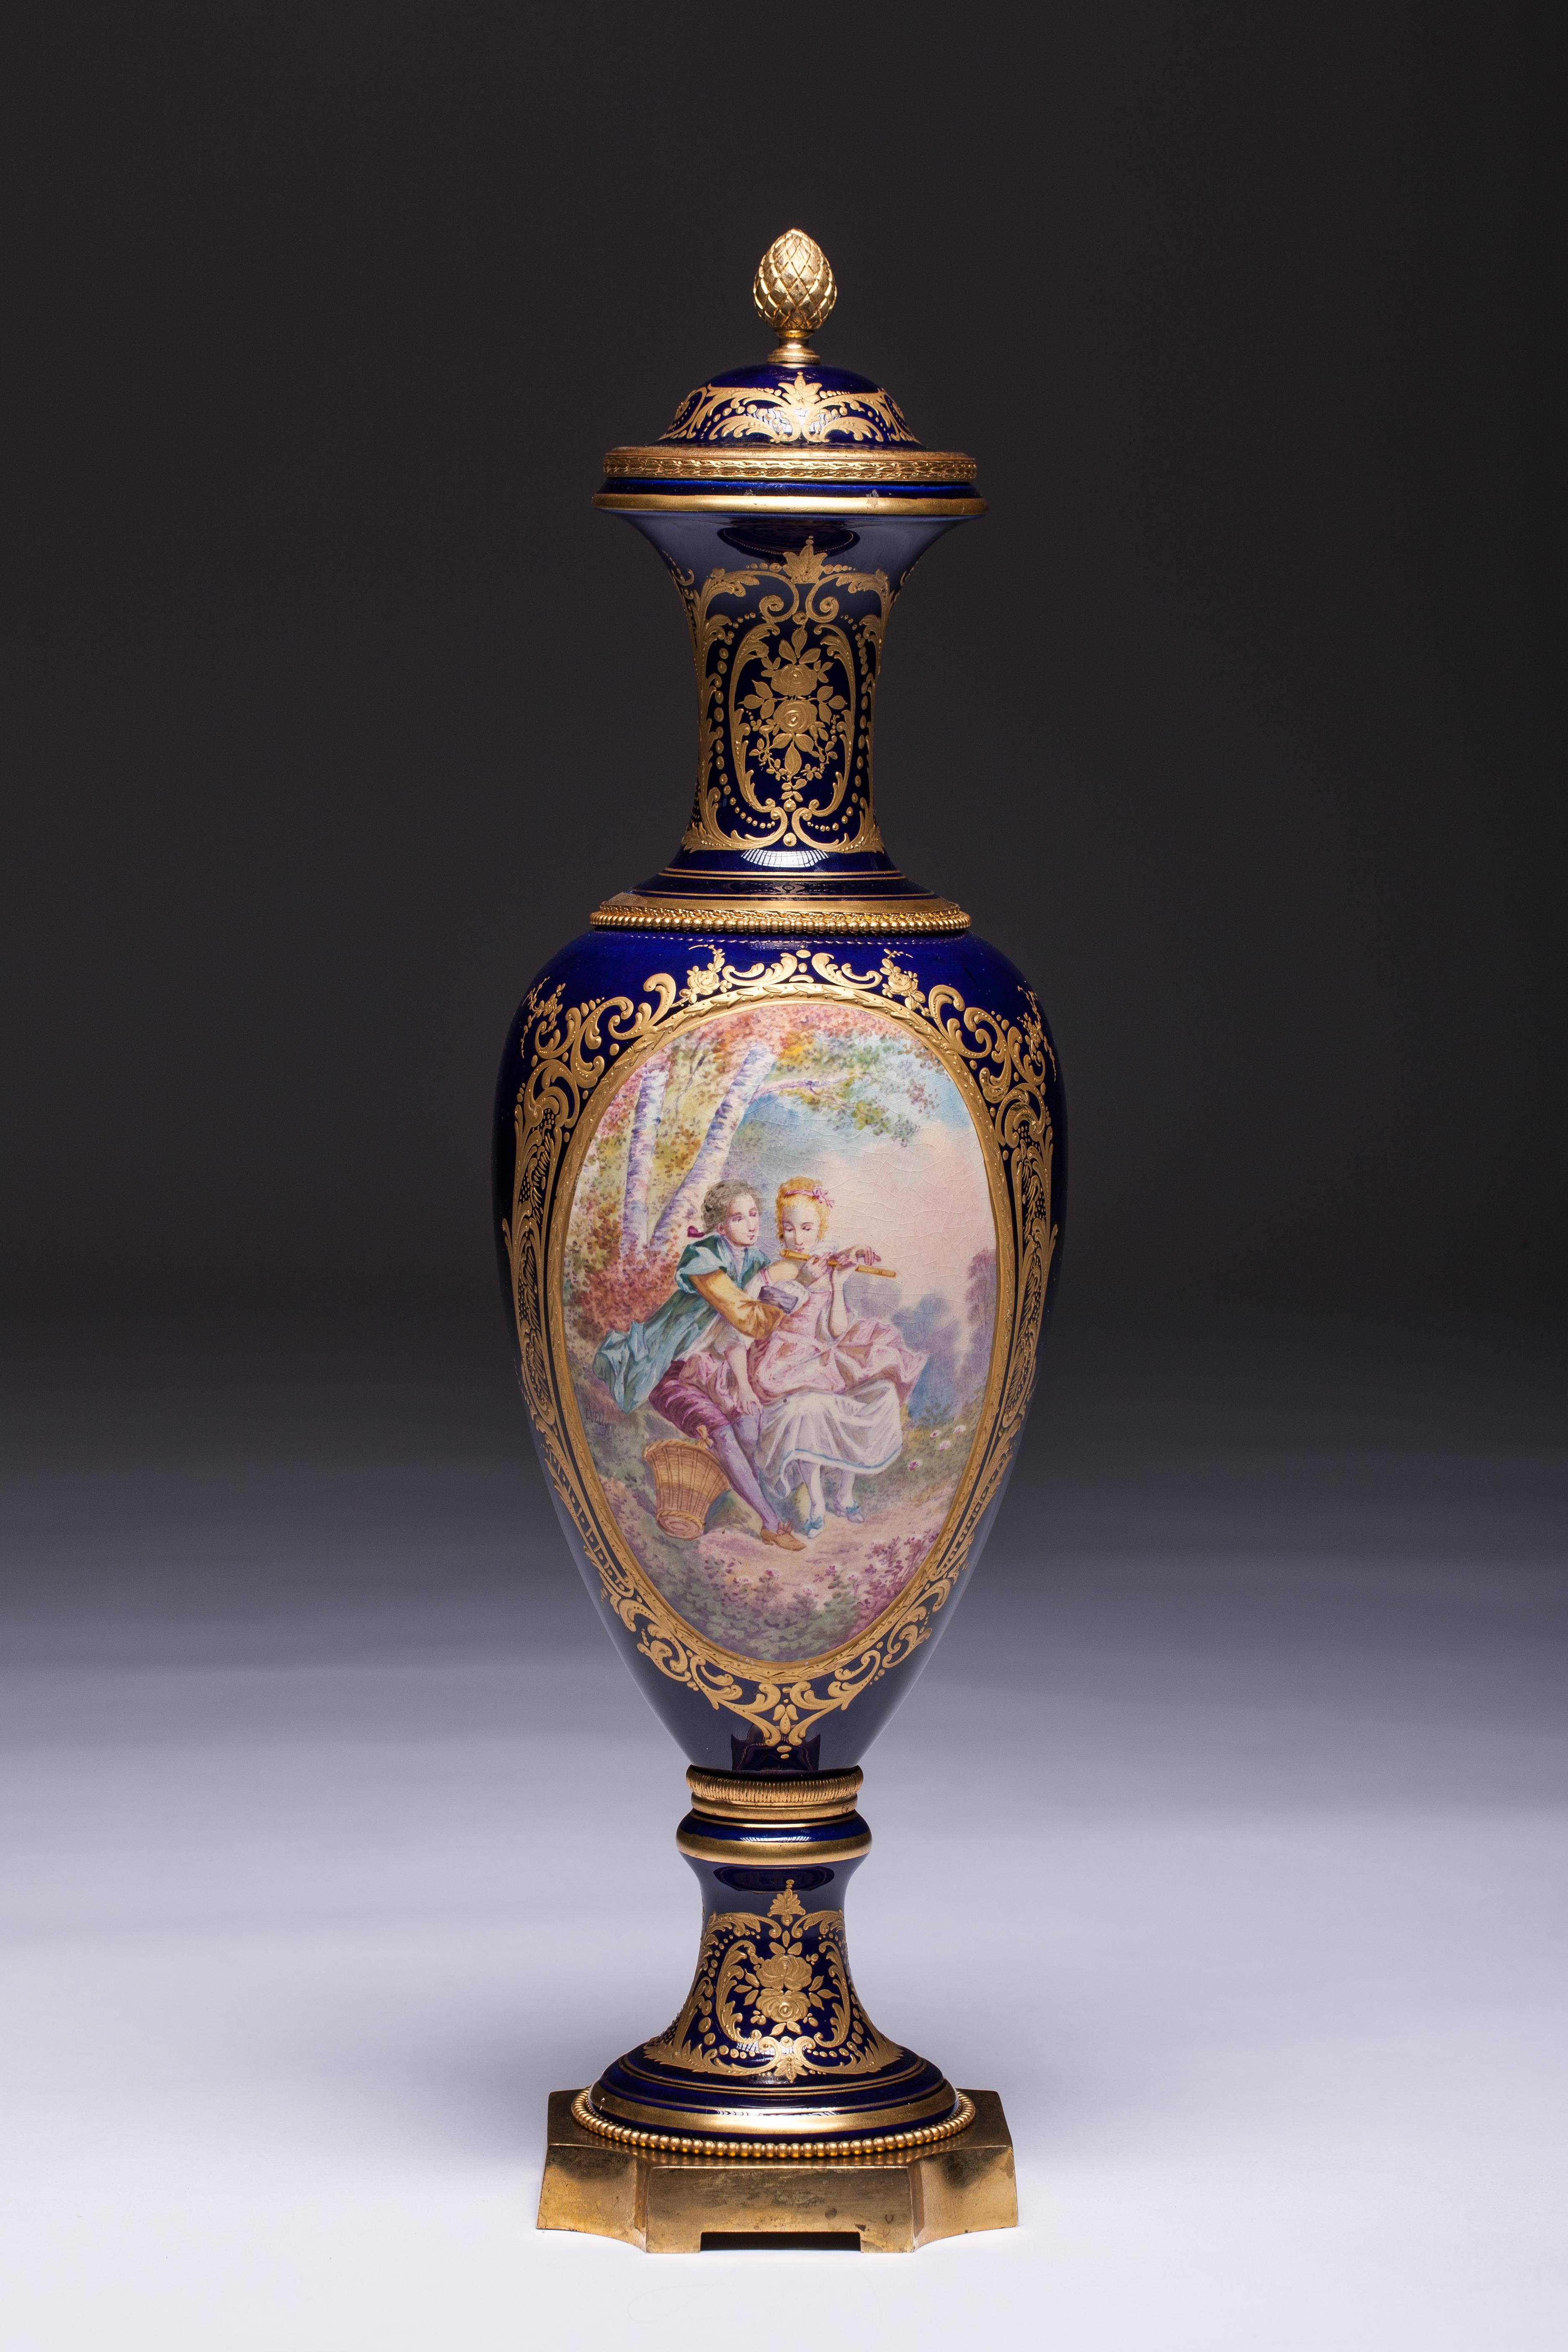 NB! Scratches here and there consistent with age and use

A good quality pair of 19th century 'Sevres' porcelain hand-painted classical vase, depicting romantic scenes to the panels, set in a dark blue background with gilded decoration and raised